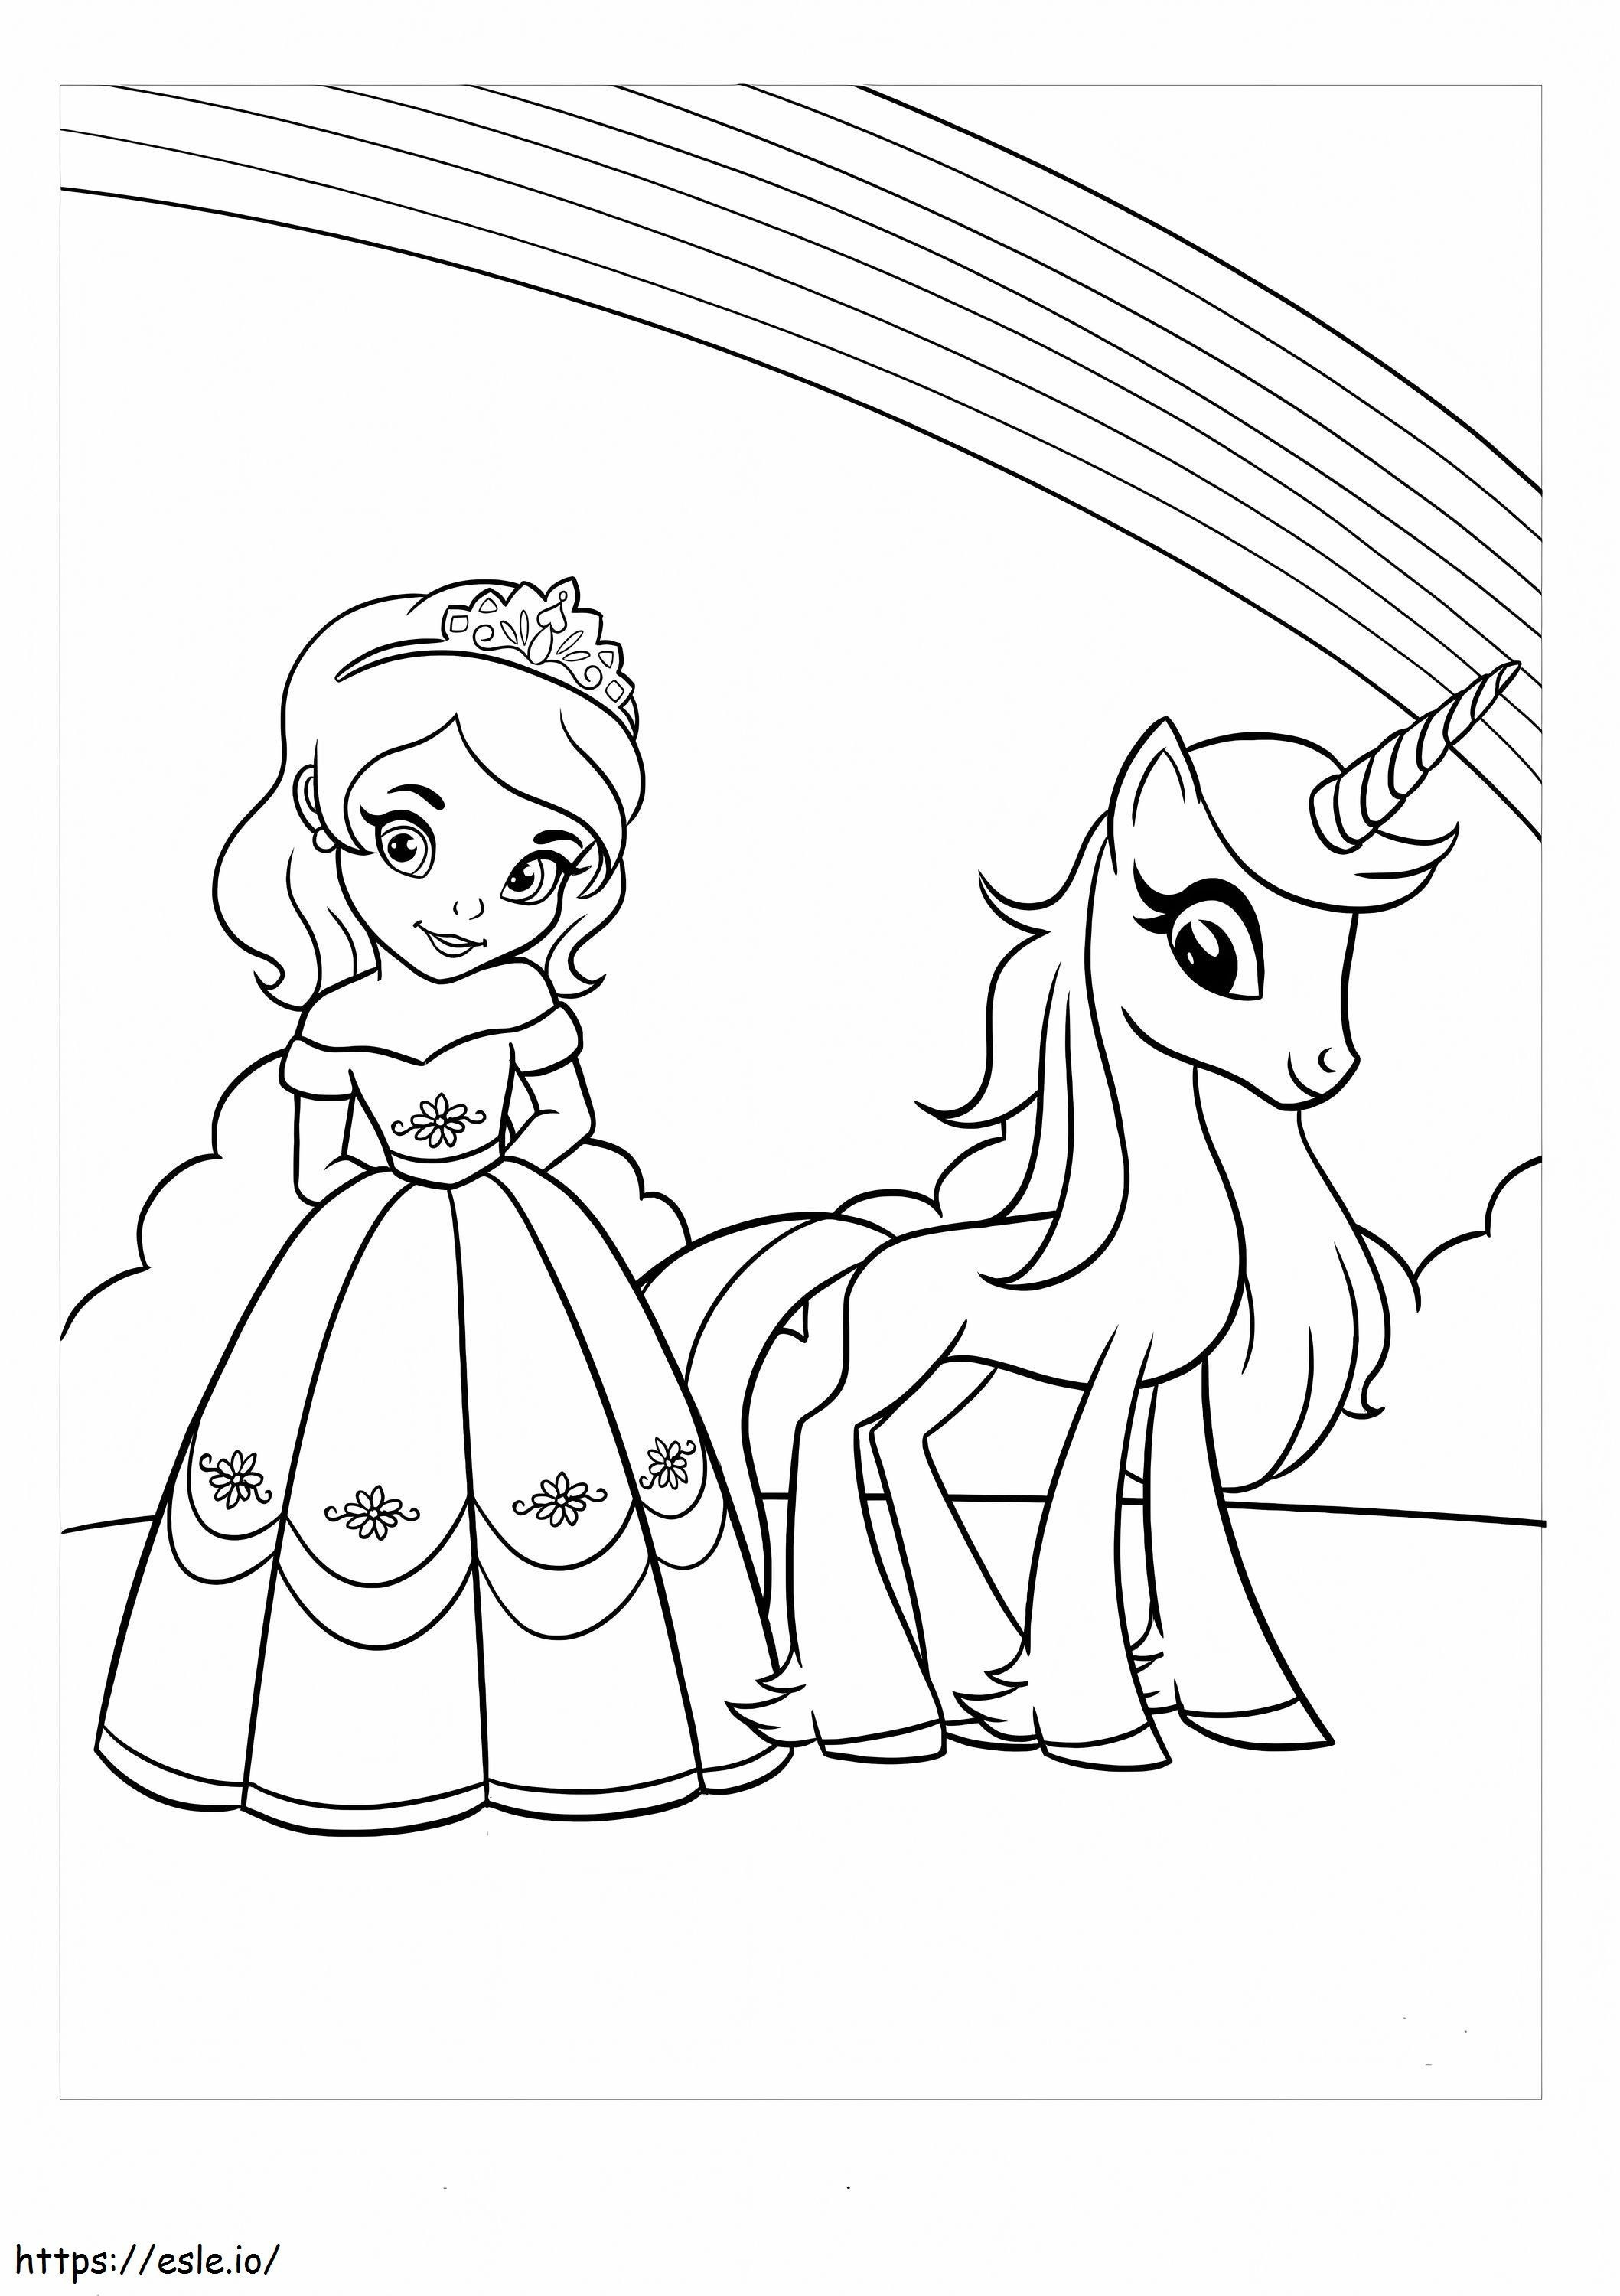 Princess and the unicorn coloring page